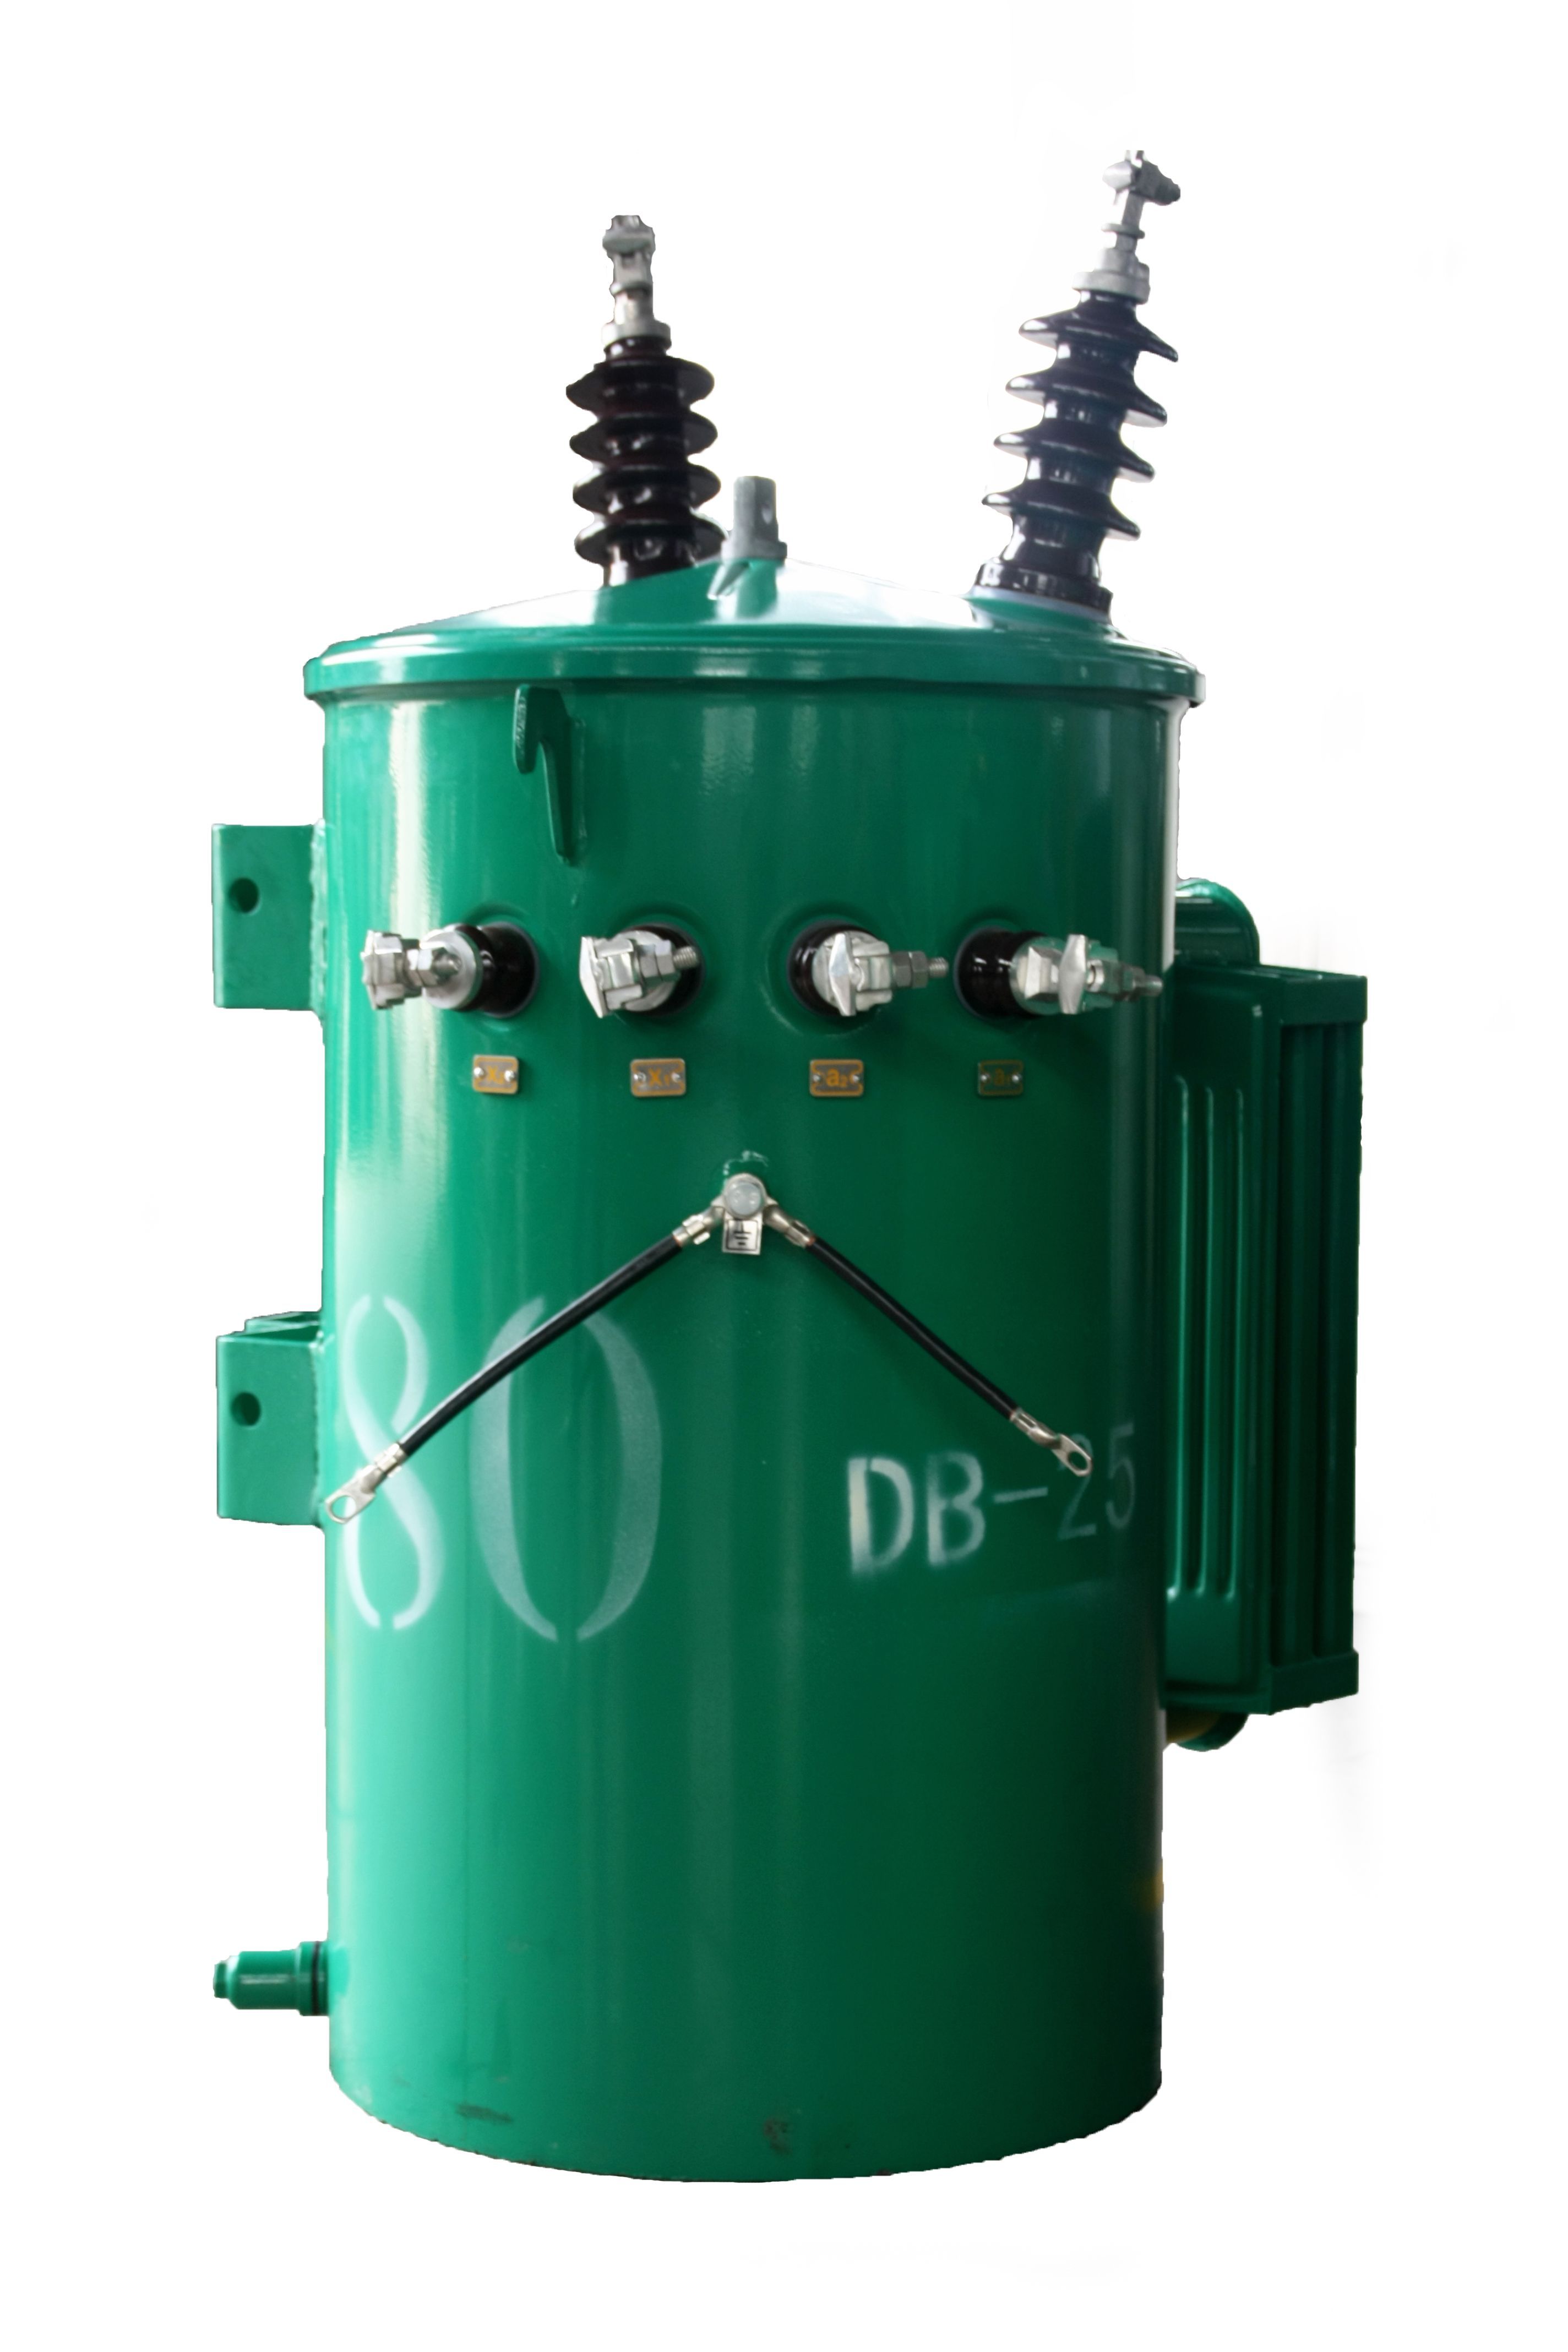 Single-phase oil-immersed distribution transformer